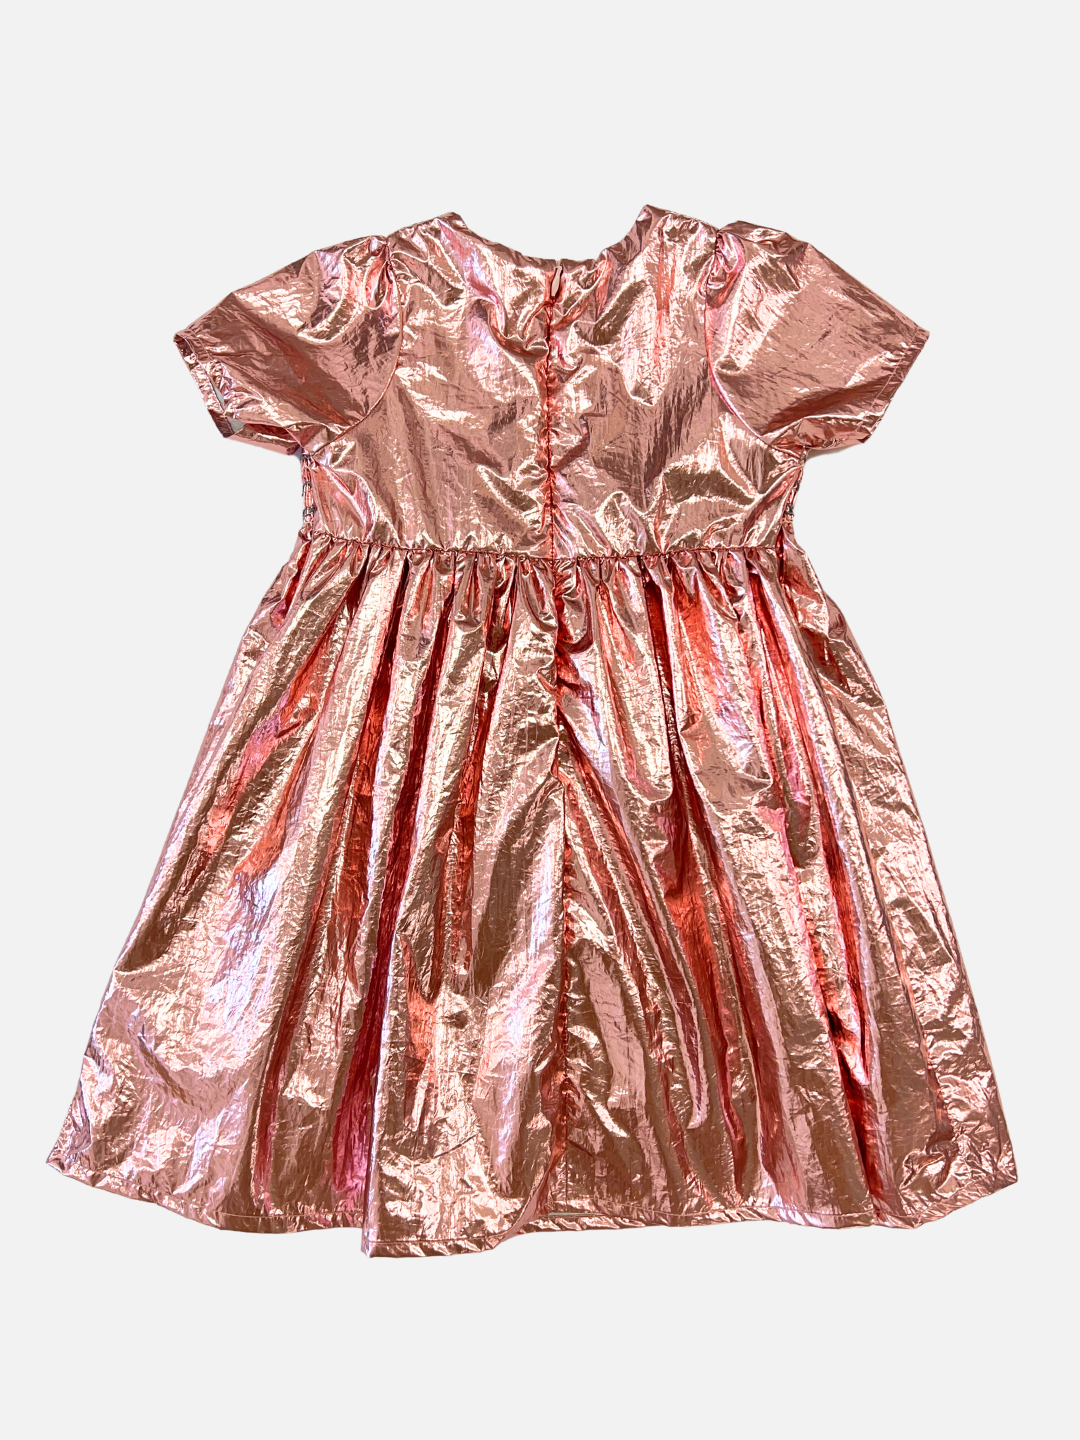 Rose | Back view of kids party dress in pink metallic fabric with a round neck, short sleeves, empire waist and full skirt.